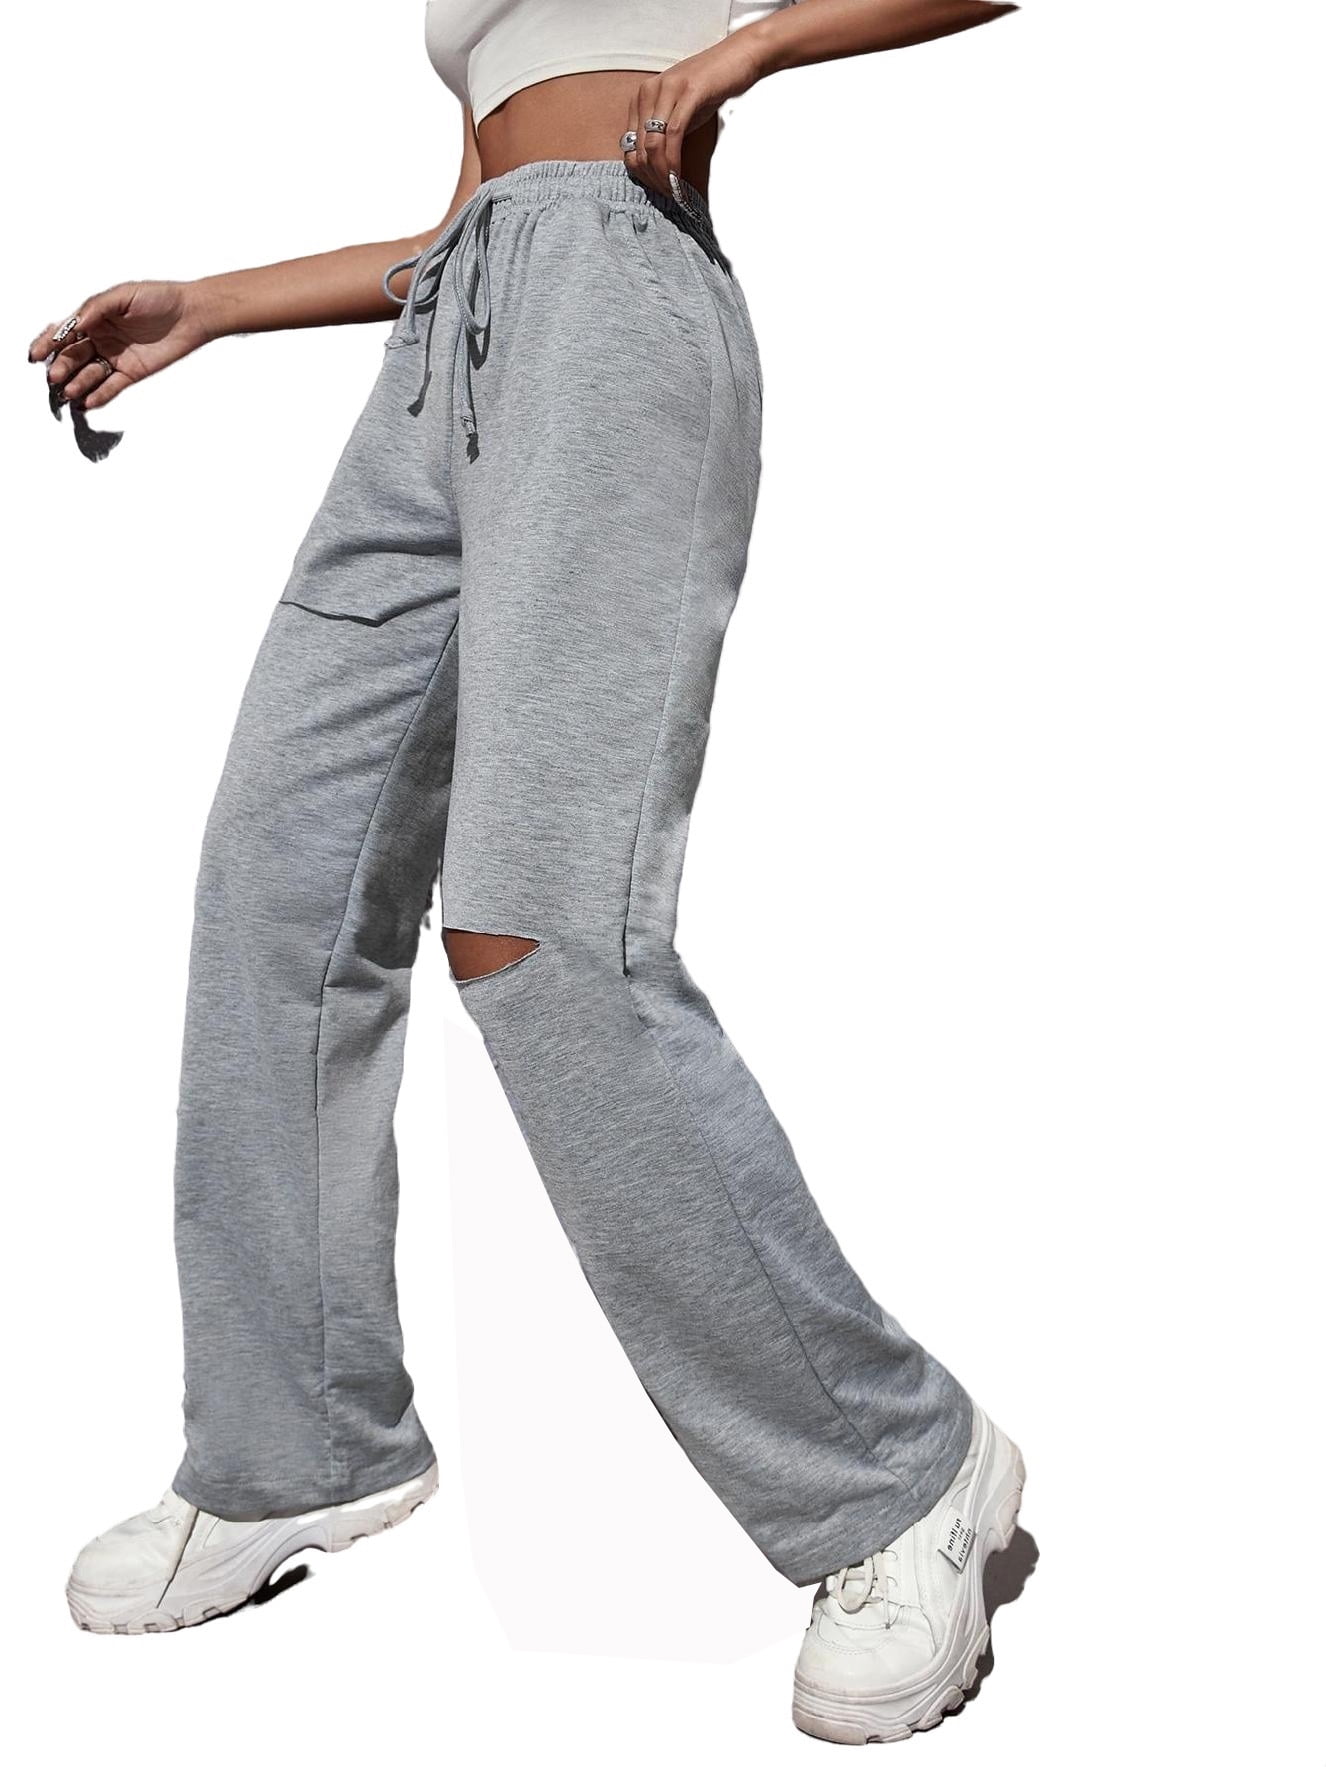 Trackpants: Browse Women Navy Blue::Light Grey Cotton Trackpants on Cliths